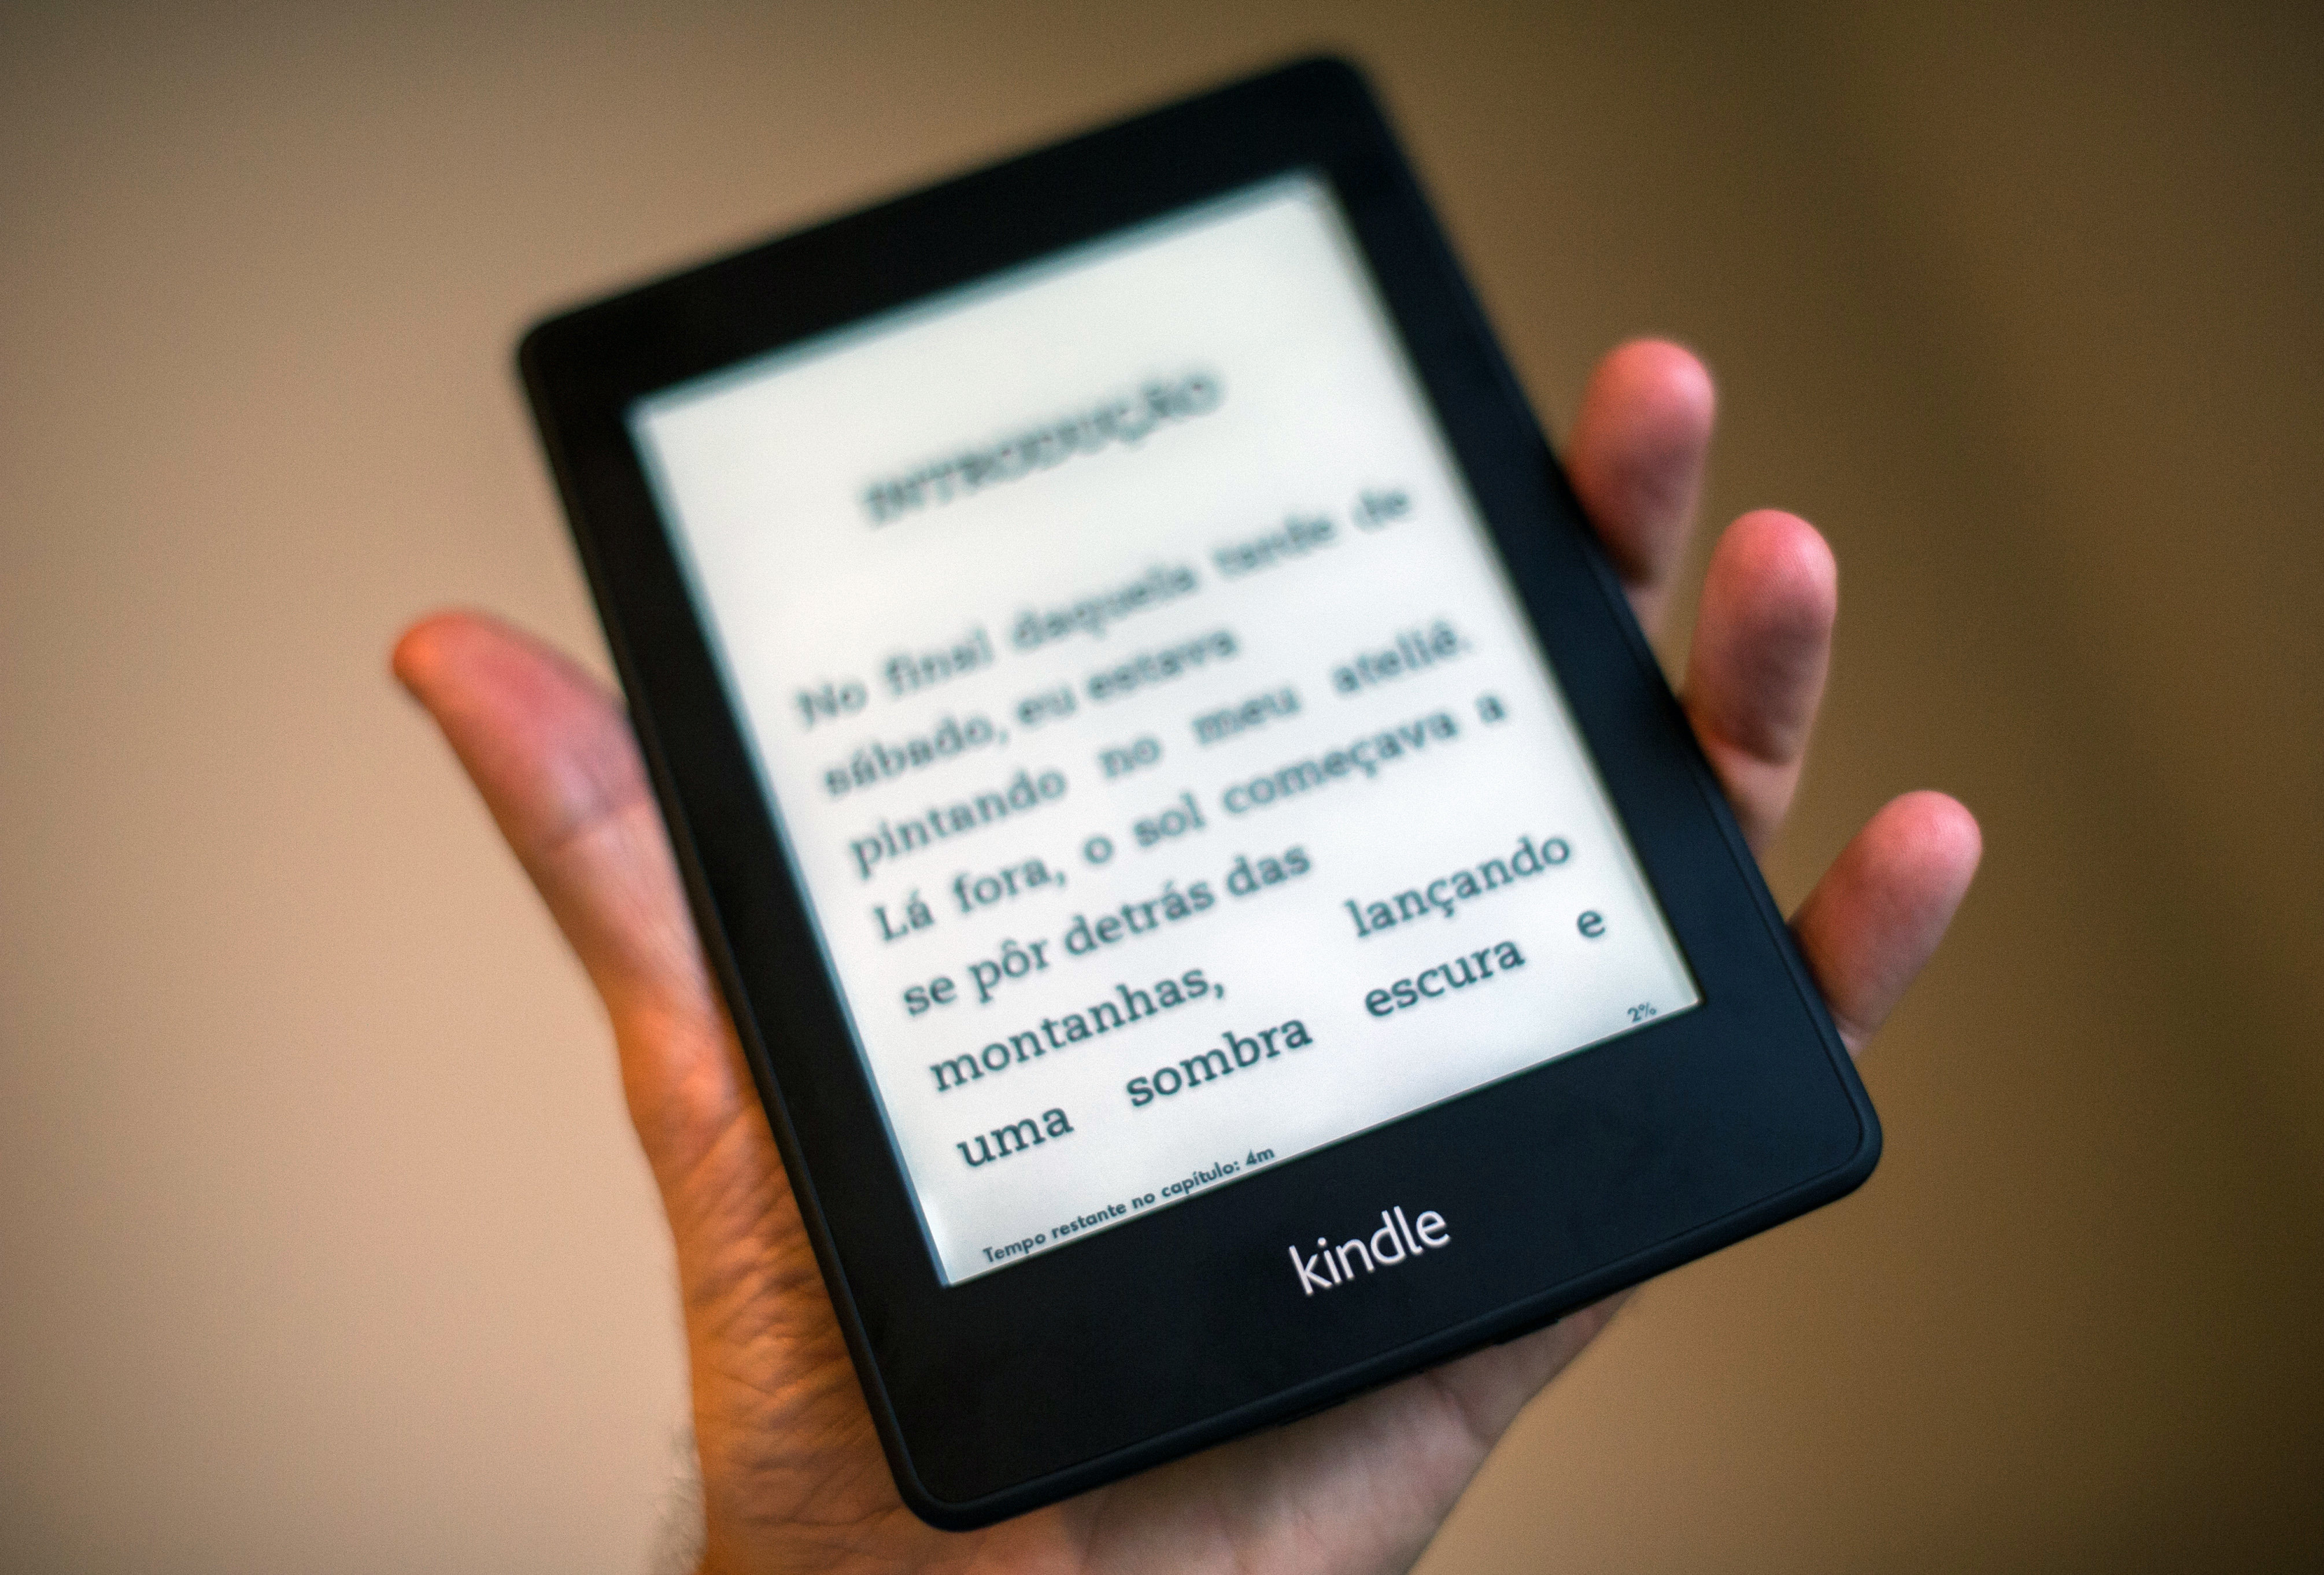 update kindle software